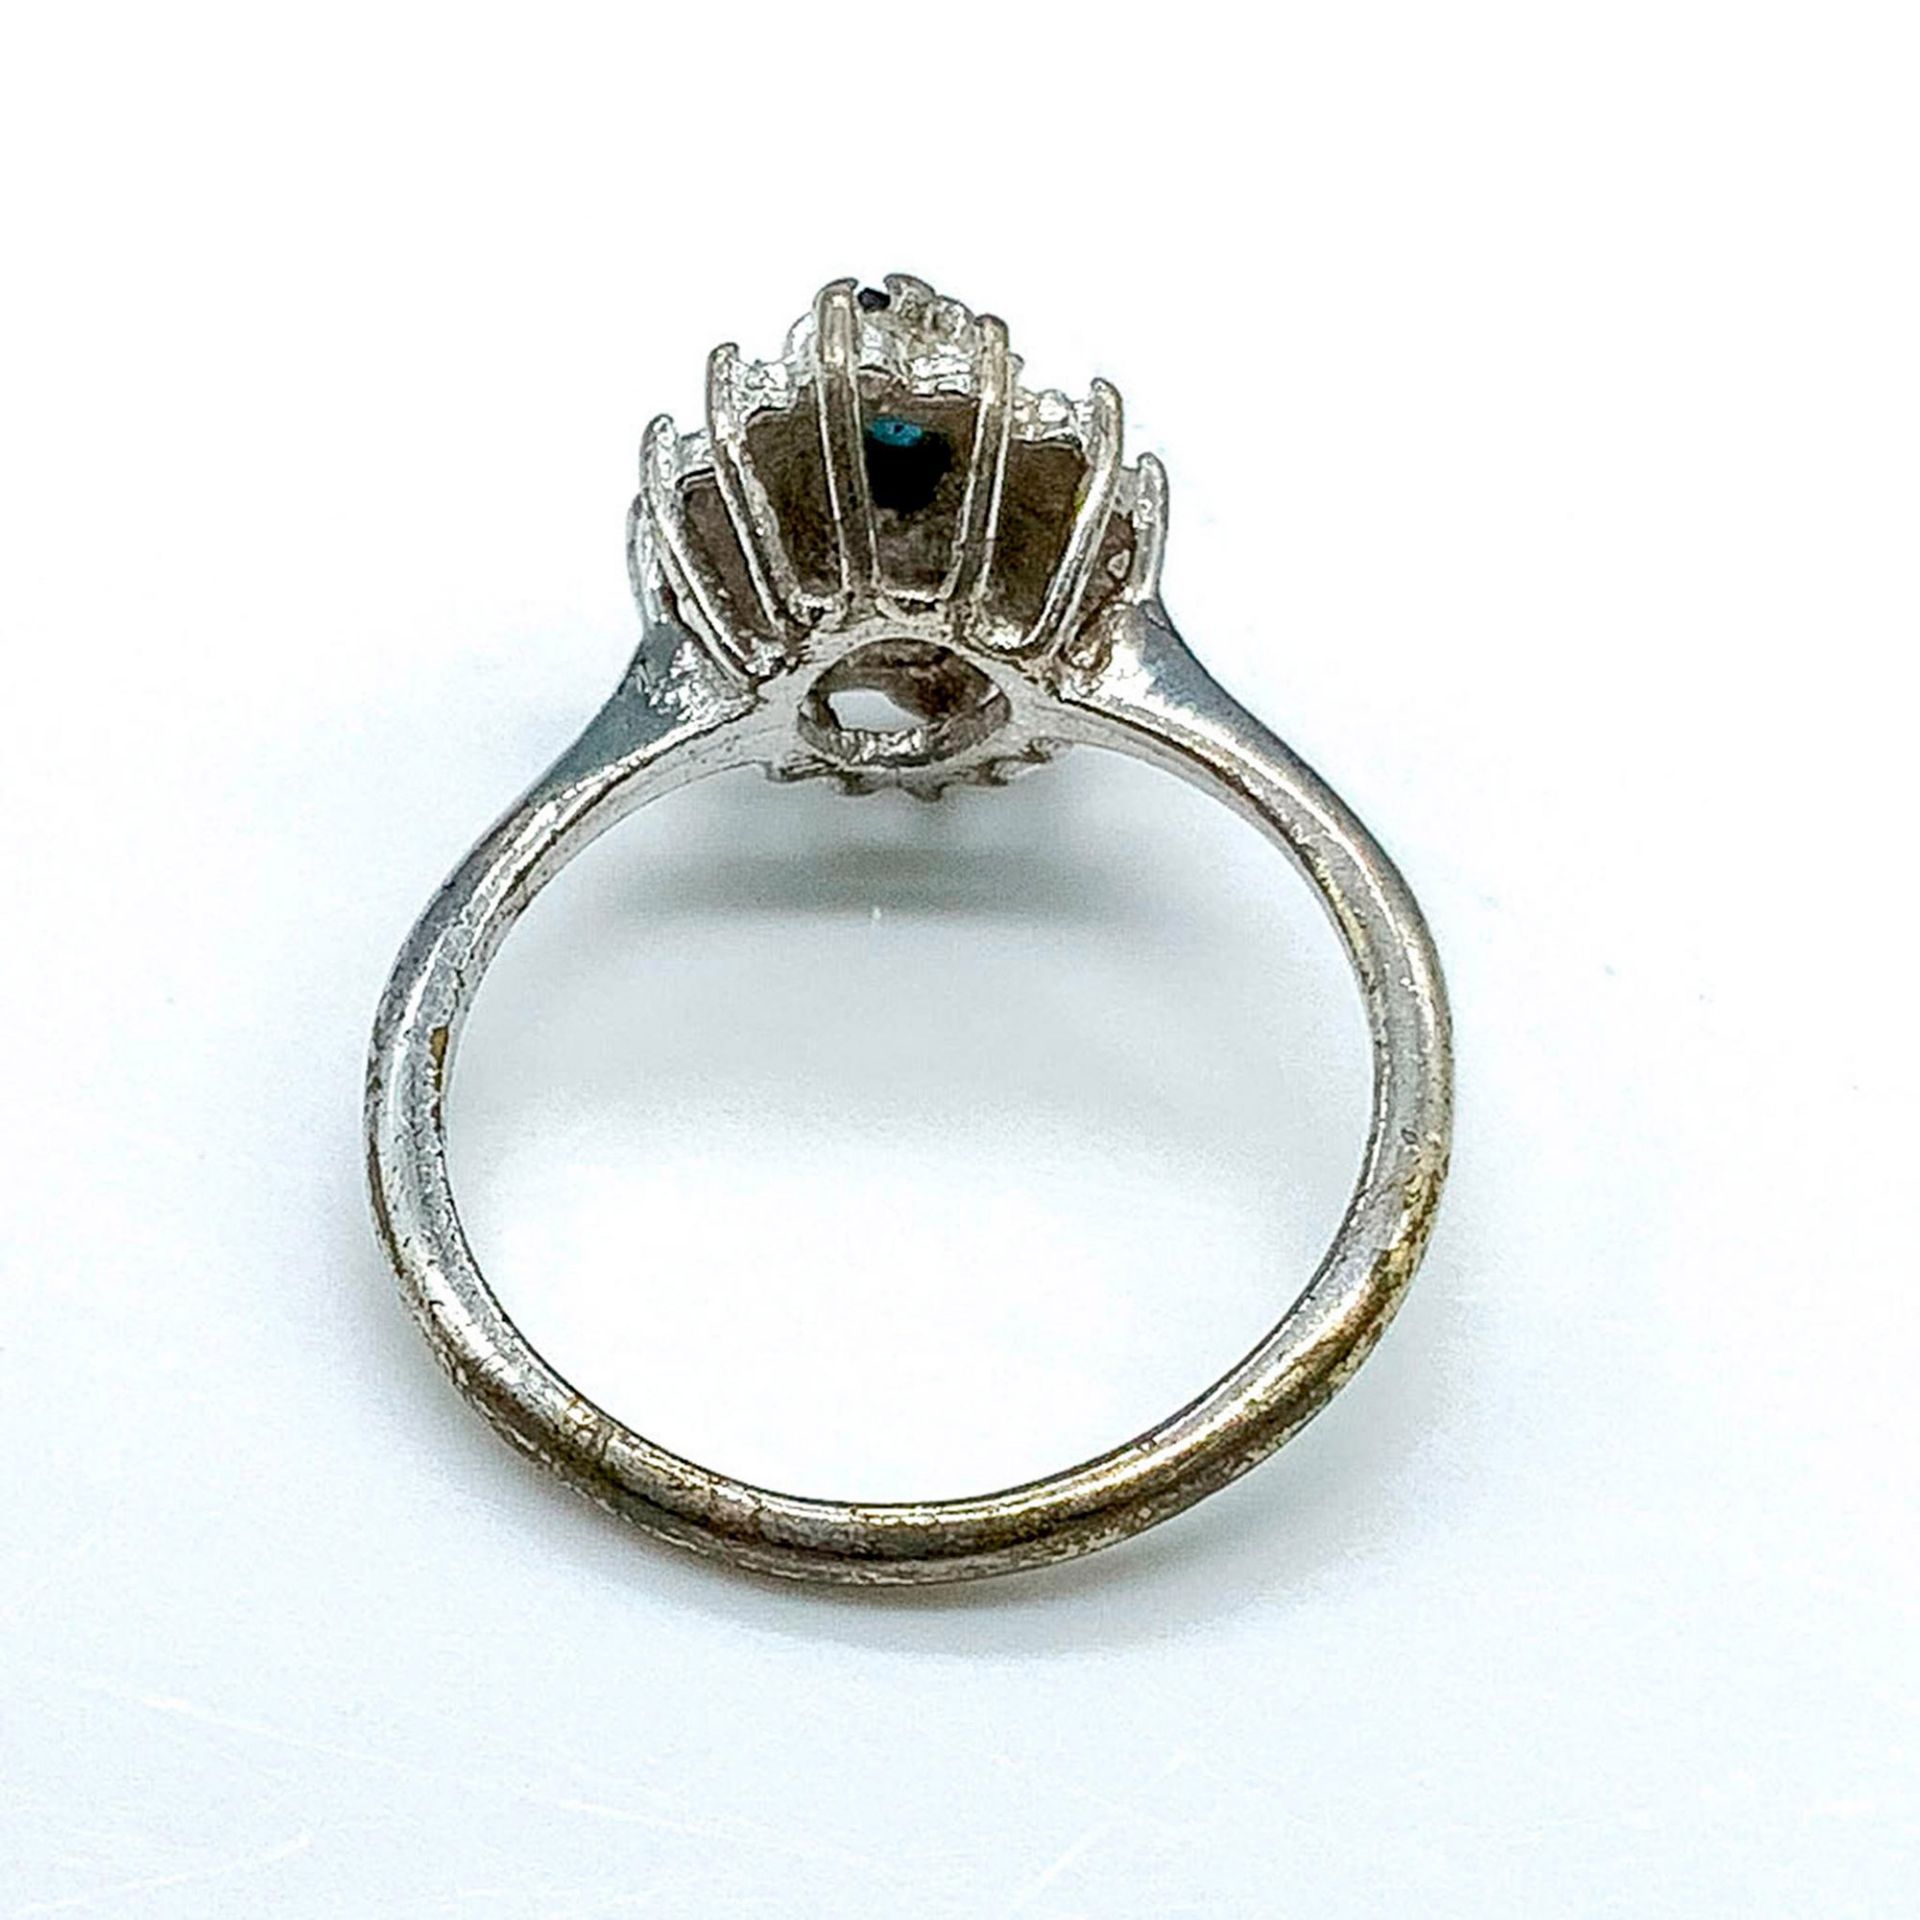 Silver Tone Metal and Rhinestone Ring - Image 2 of 2